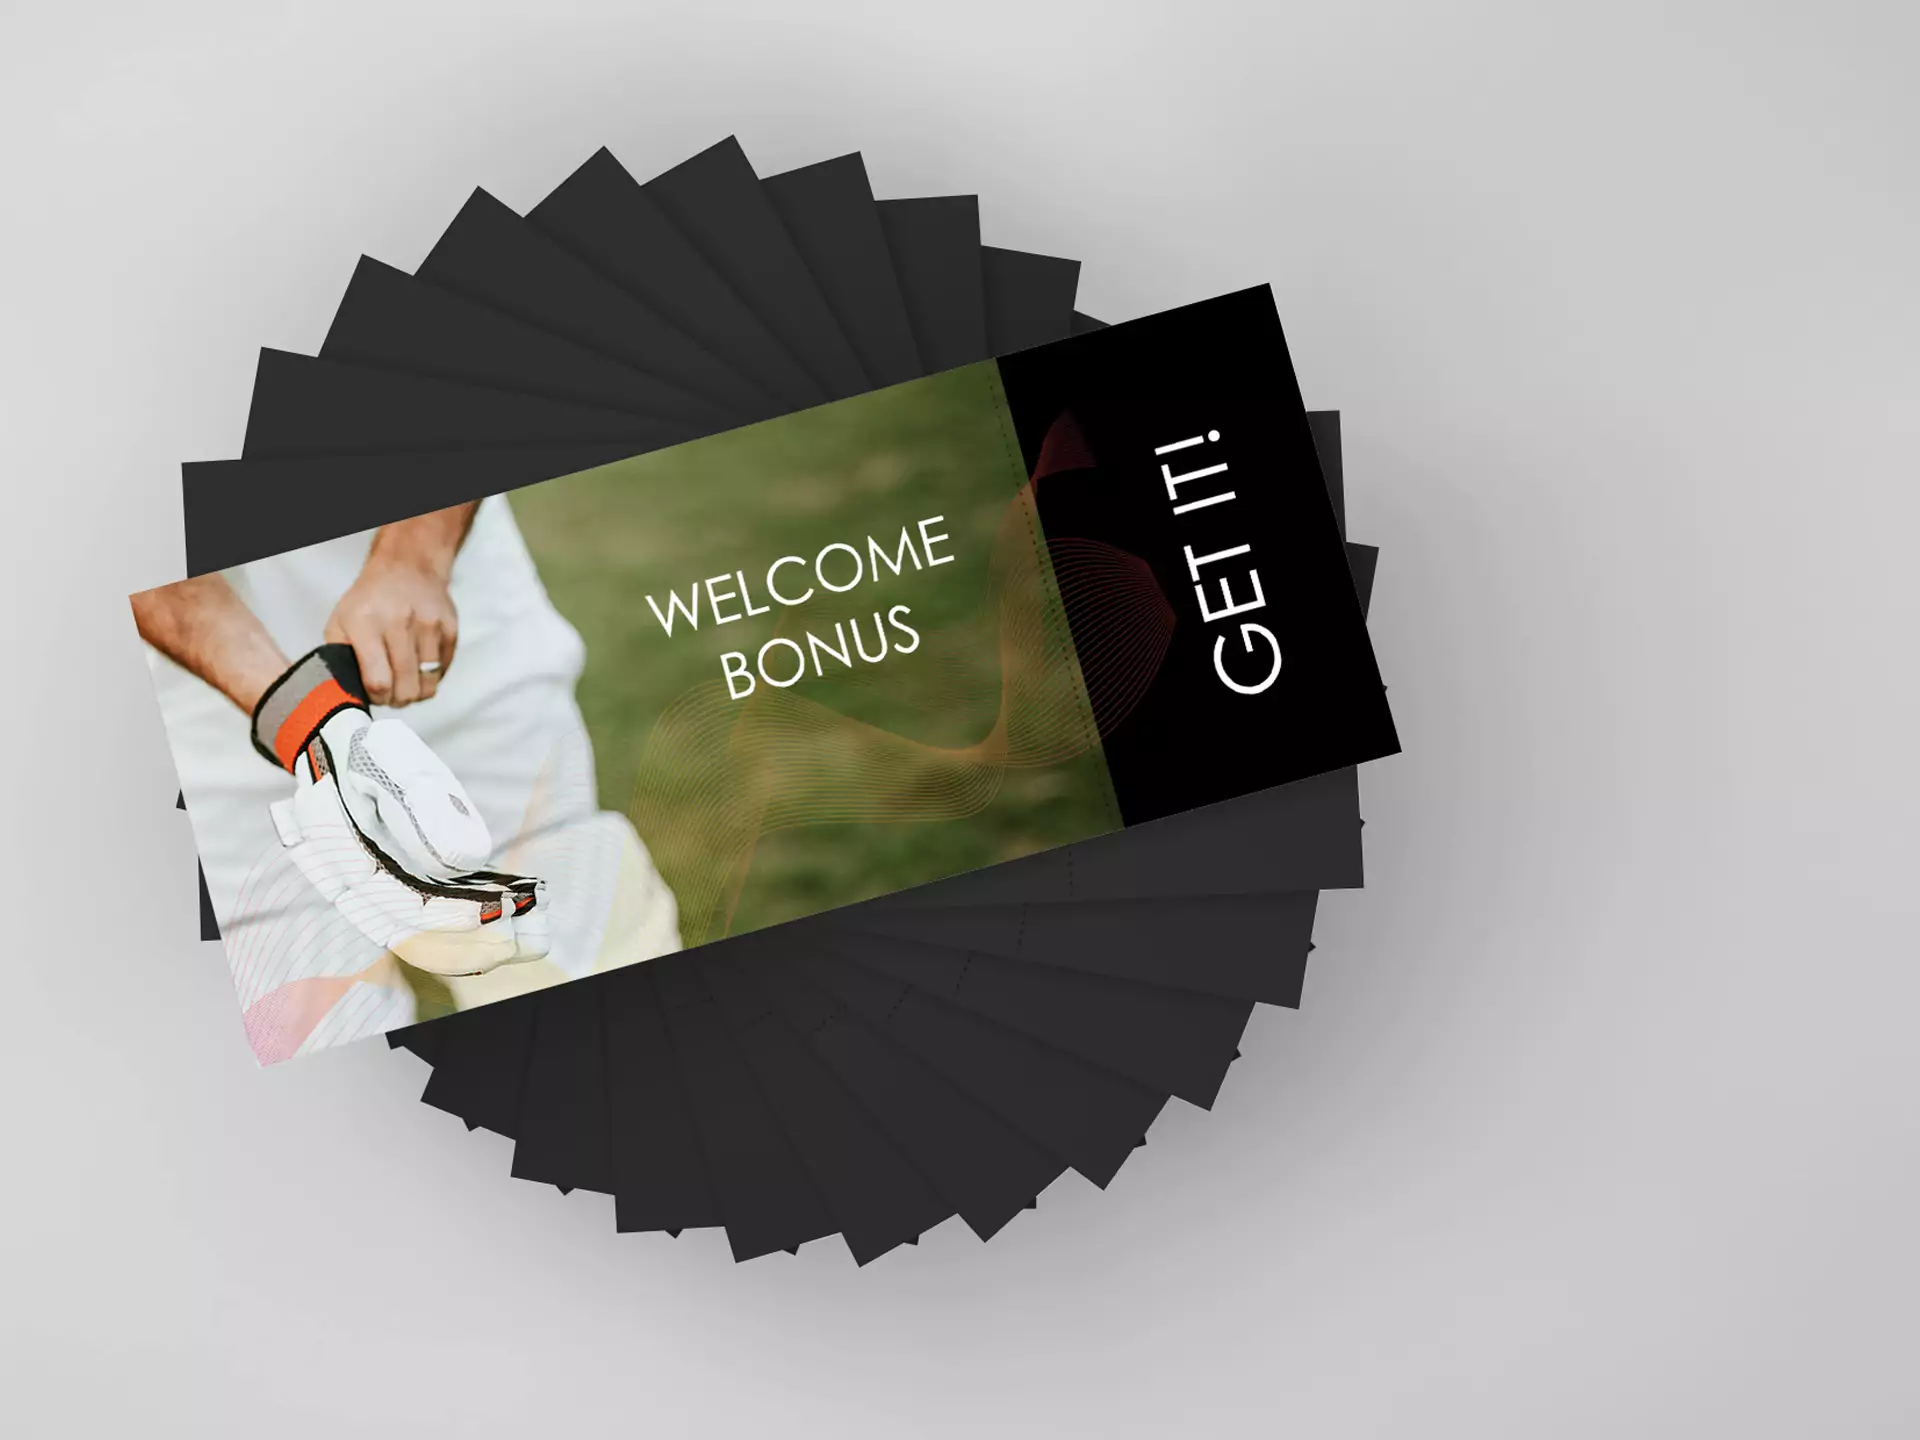 Every new user can get a welcome bonus for cricket betting.